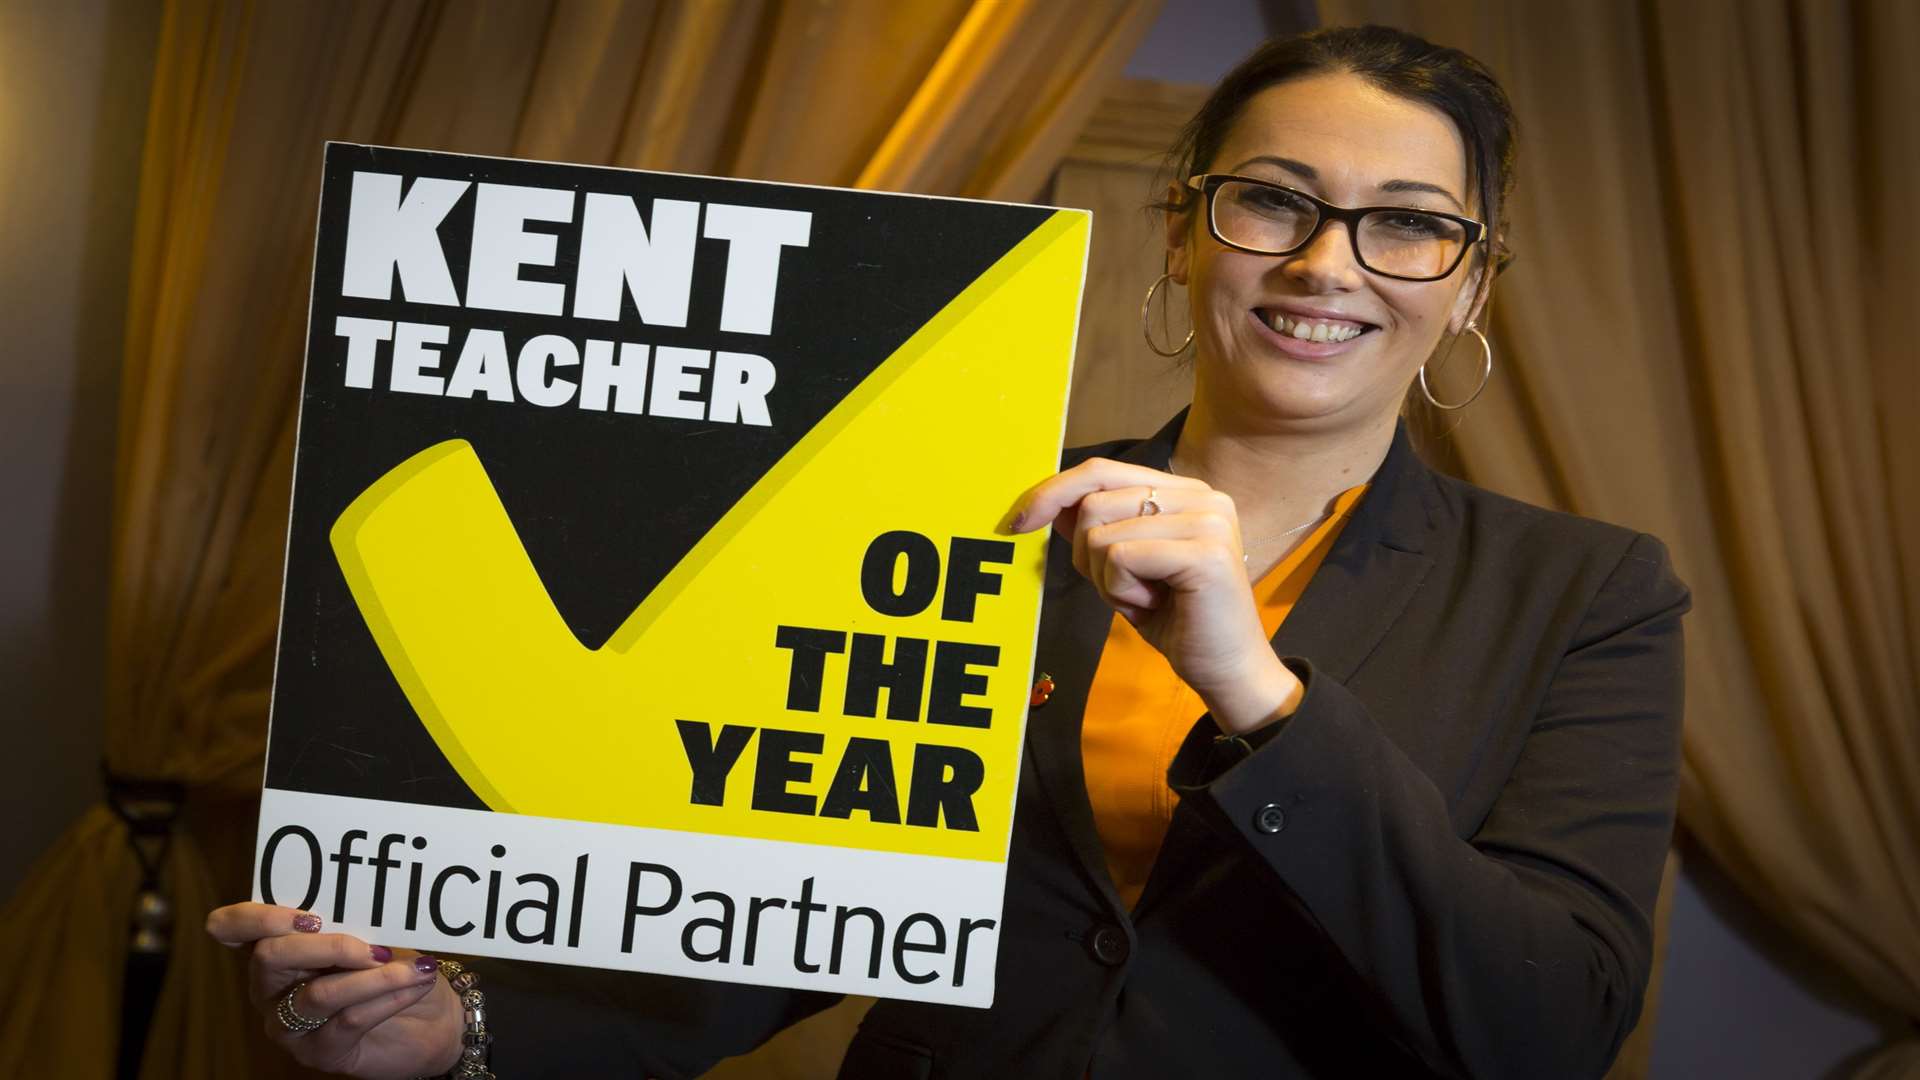 Leah Macdonald from Three R's Teacher Recruitment which is supporting the Kent Teacher of the Year Awards 2018.